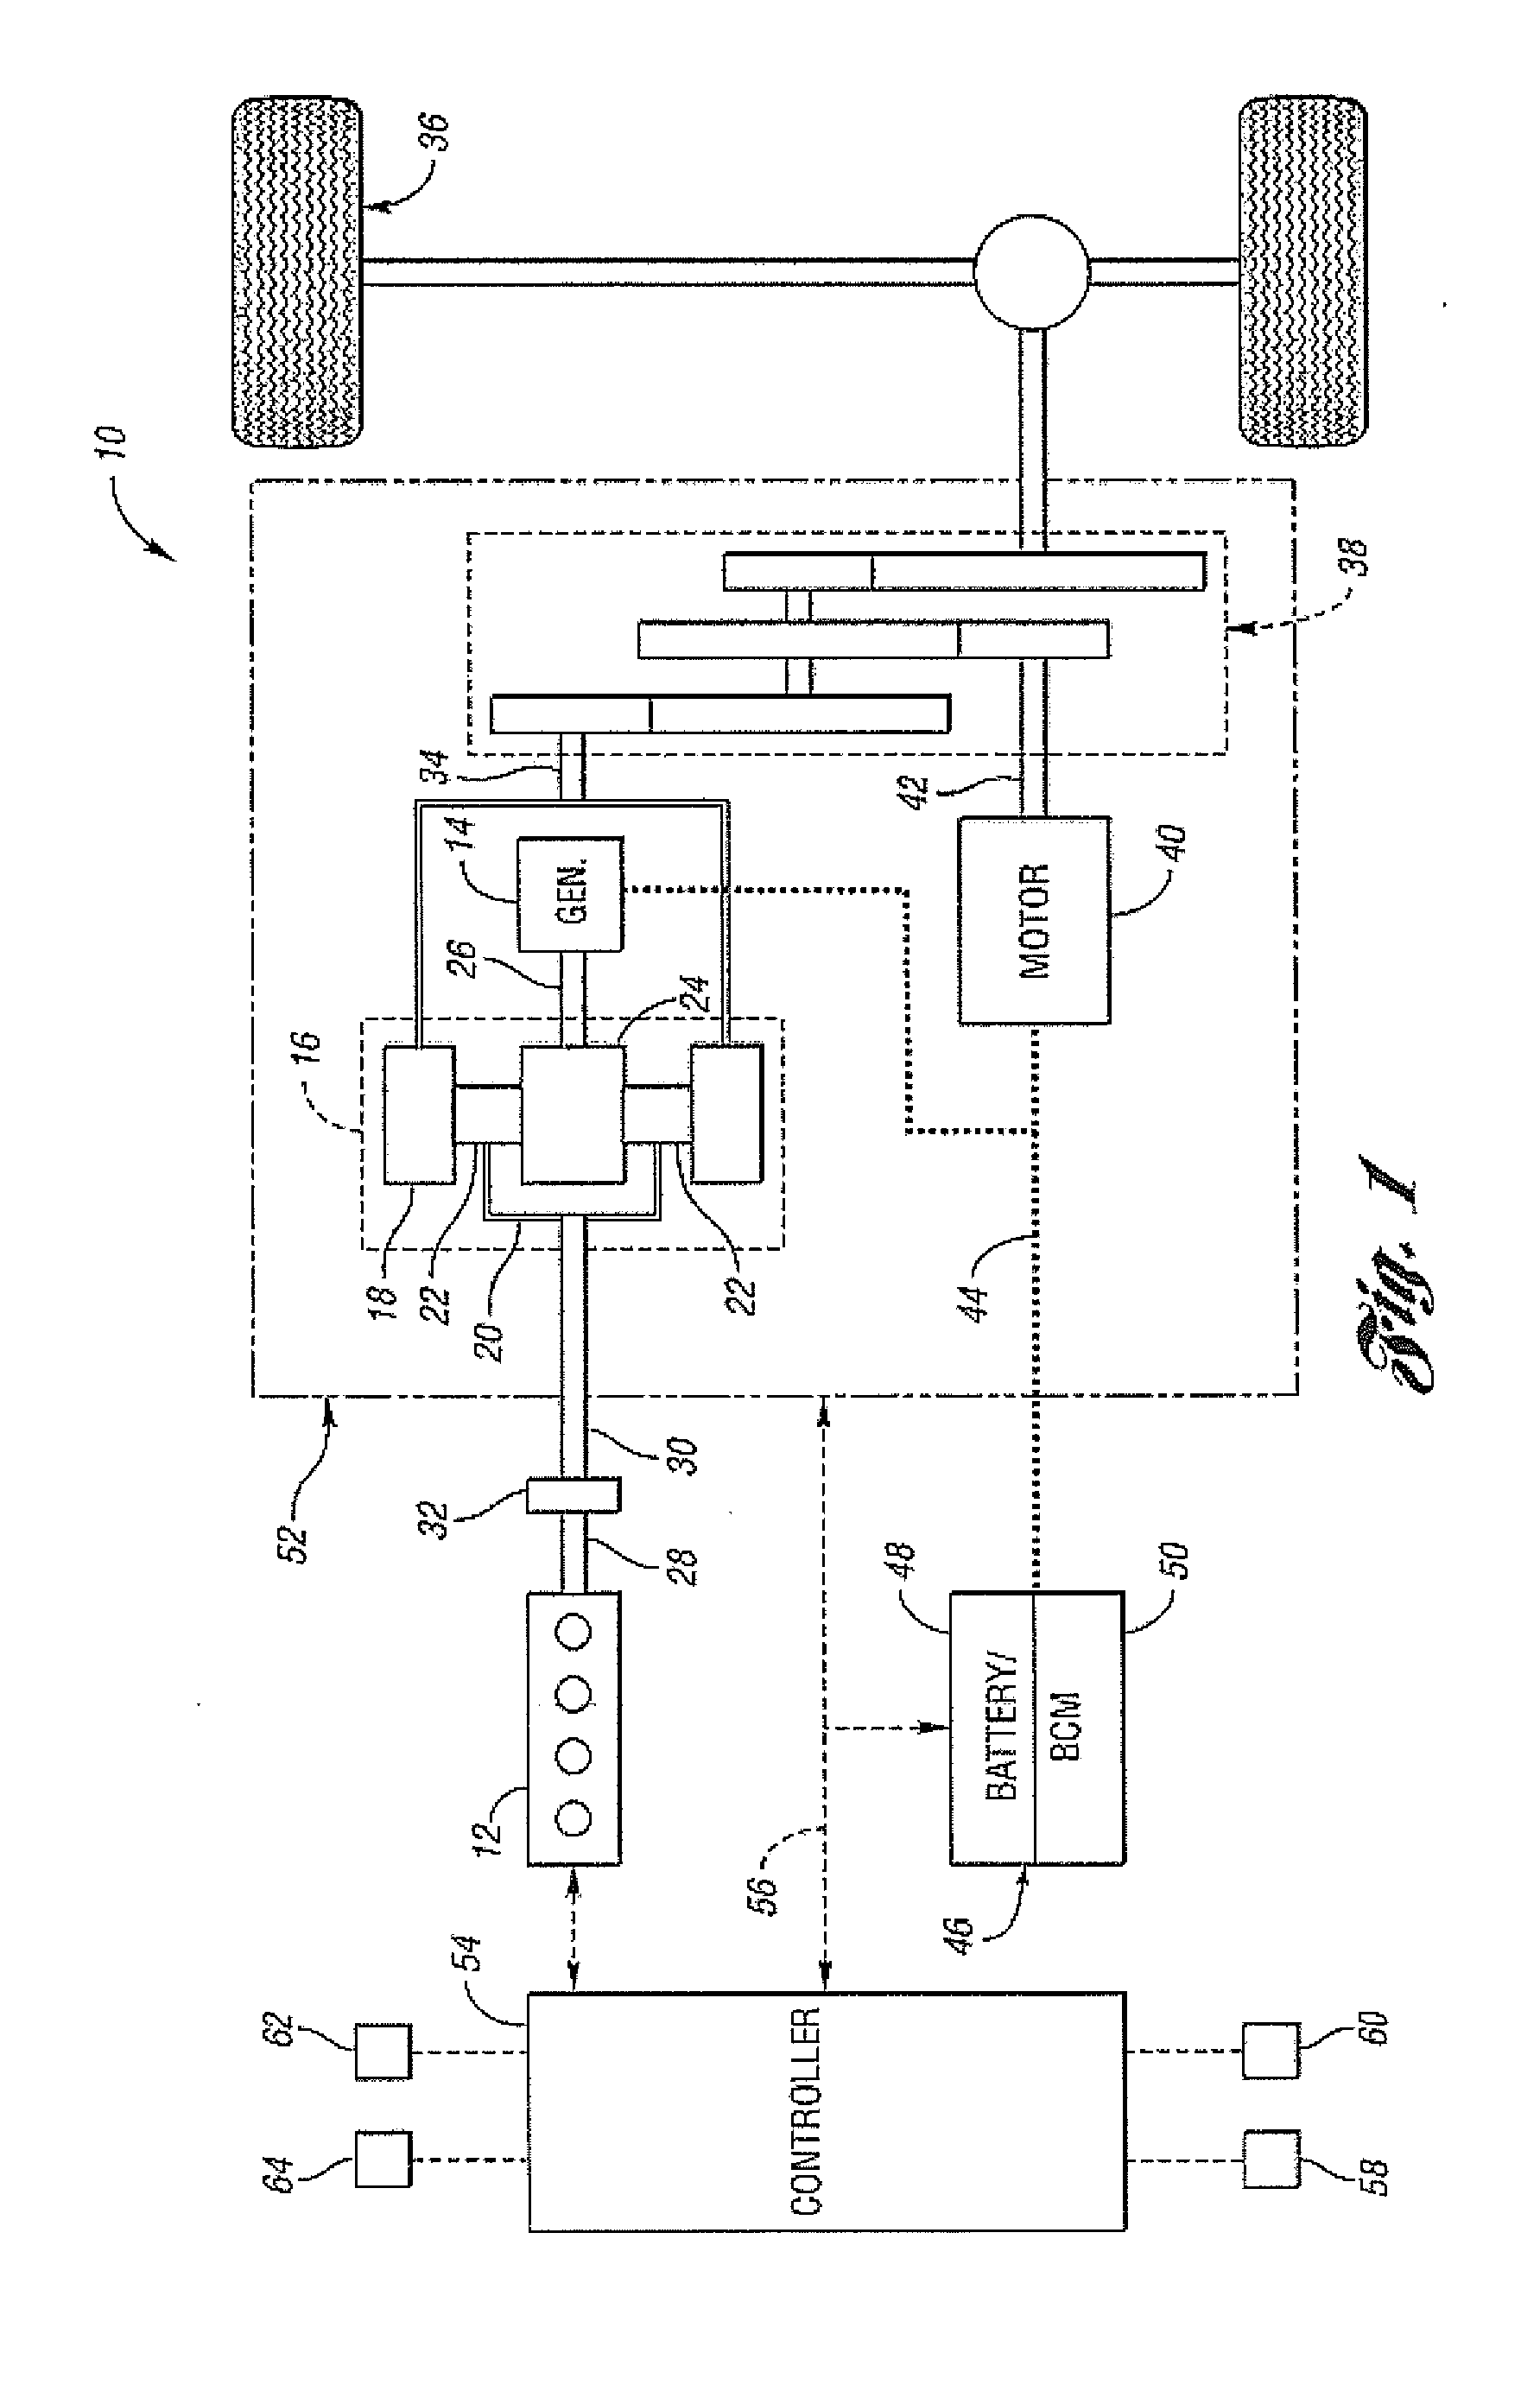 Method and system for displaying recovered energy for a hybrid electric vehicle